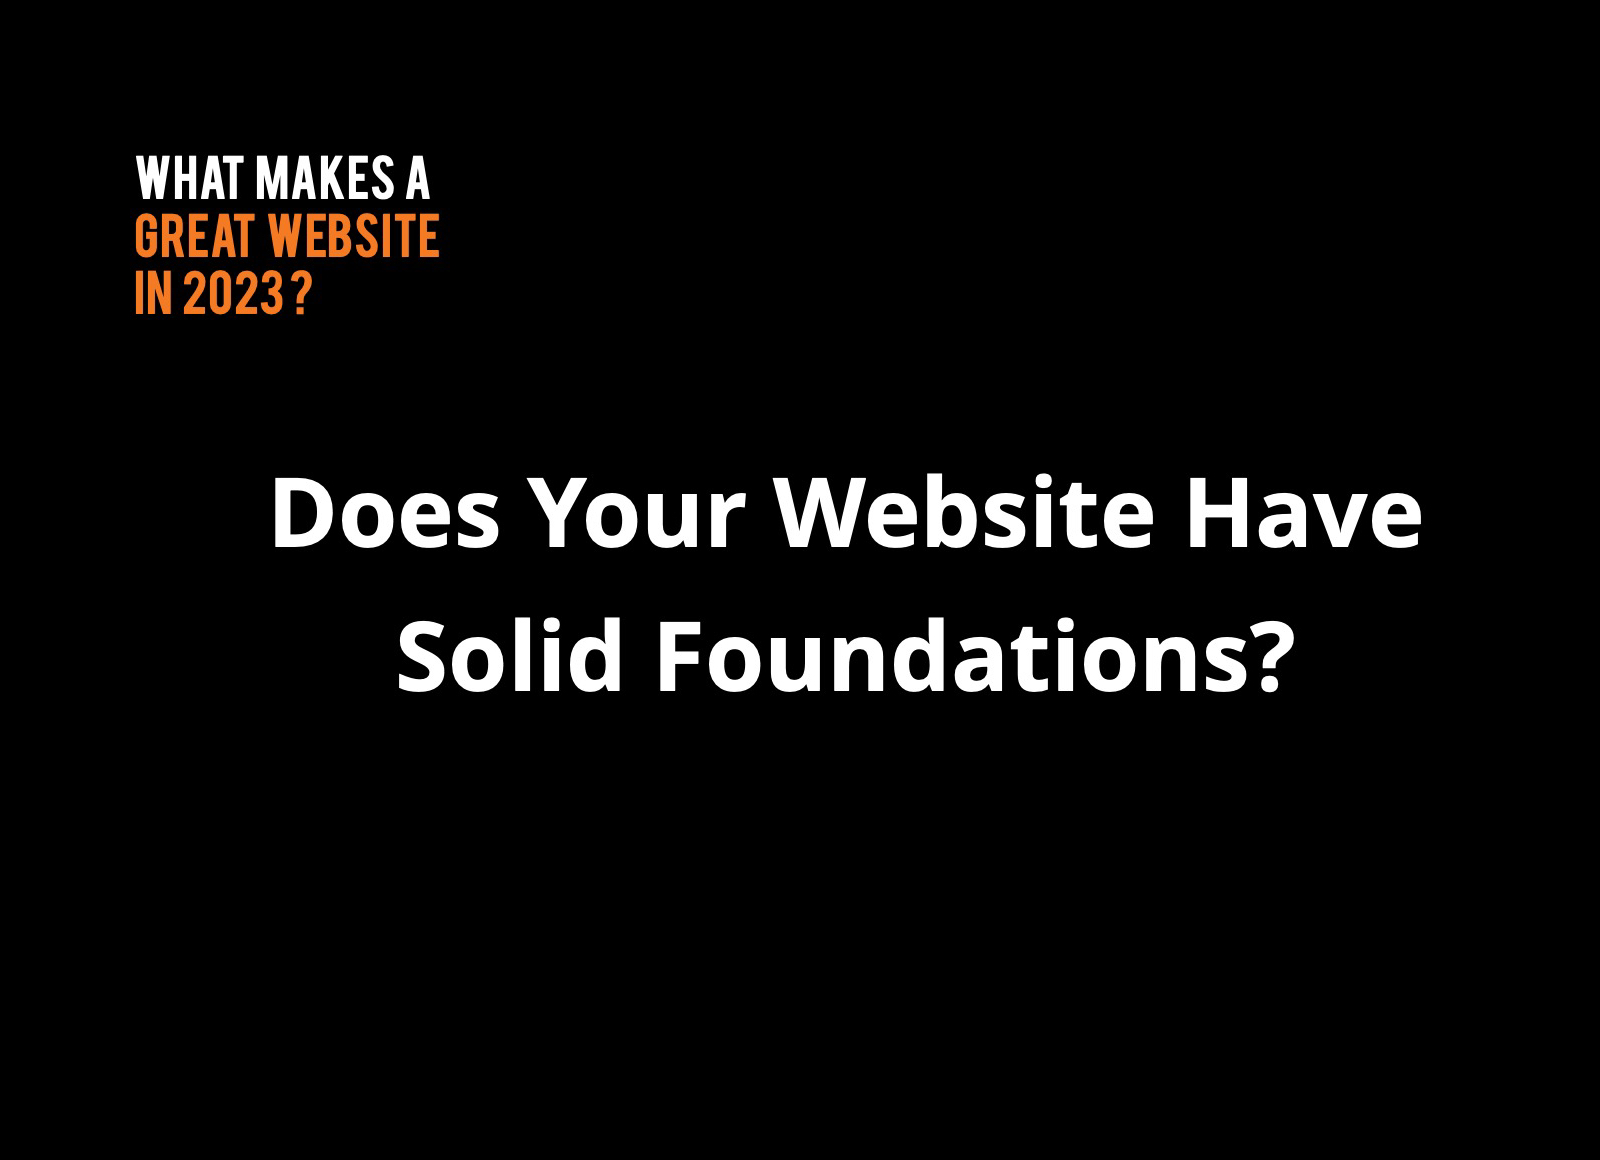 Does Your Website Have Solid Foundations?